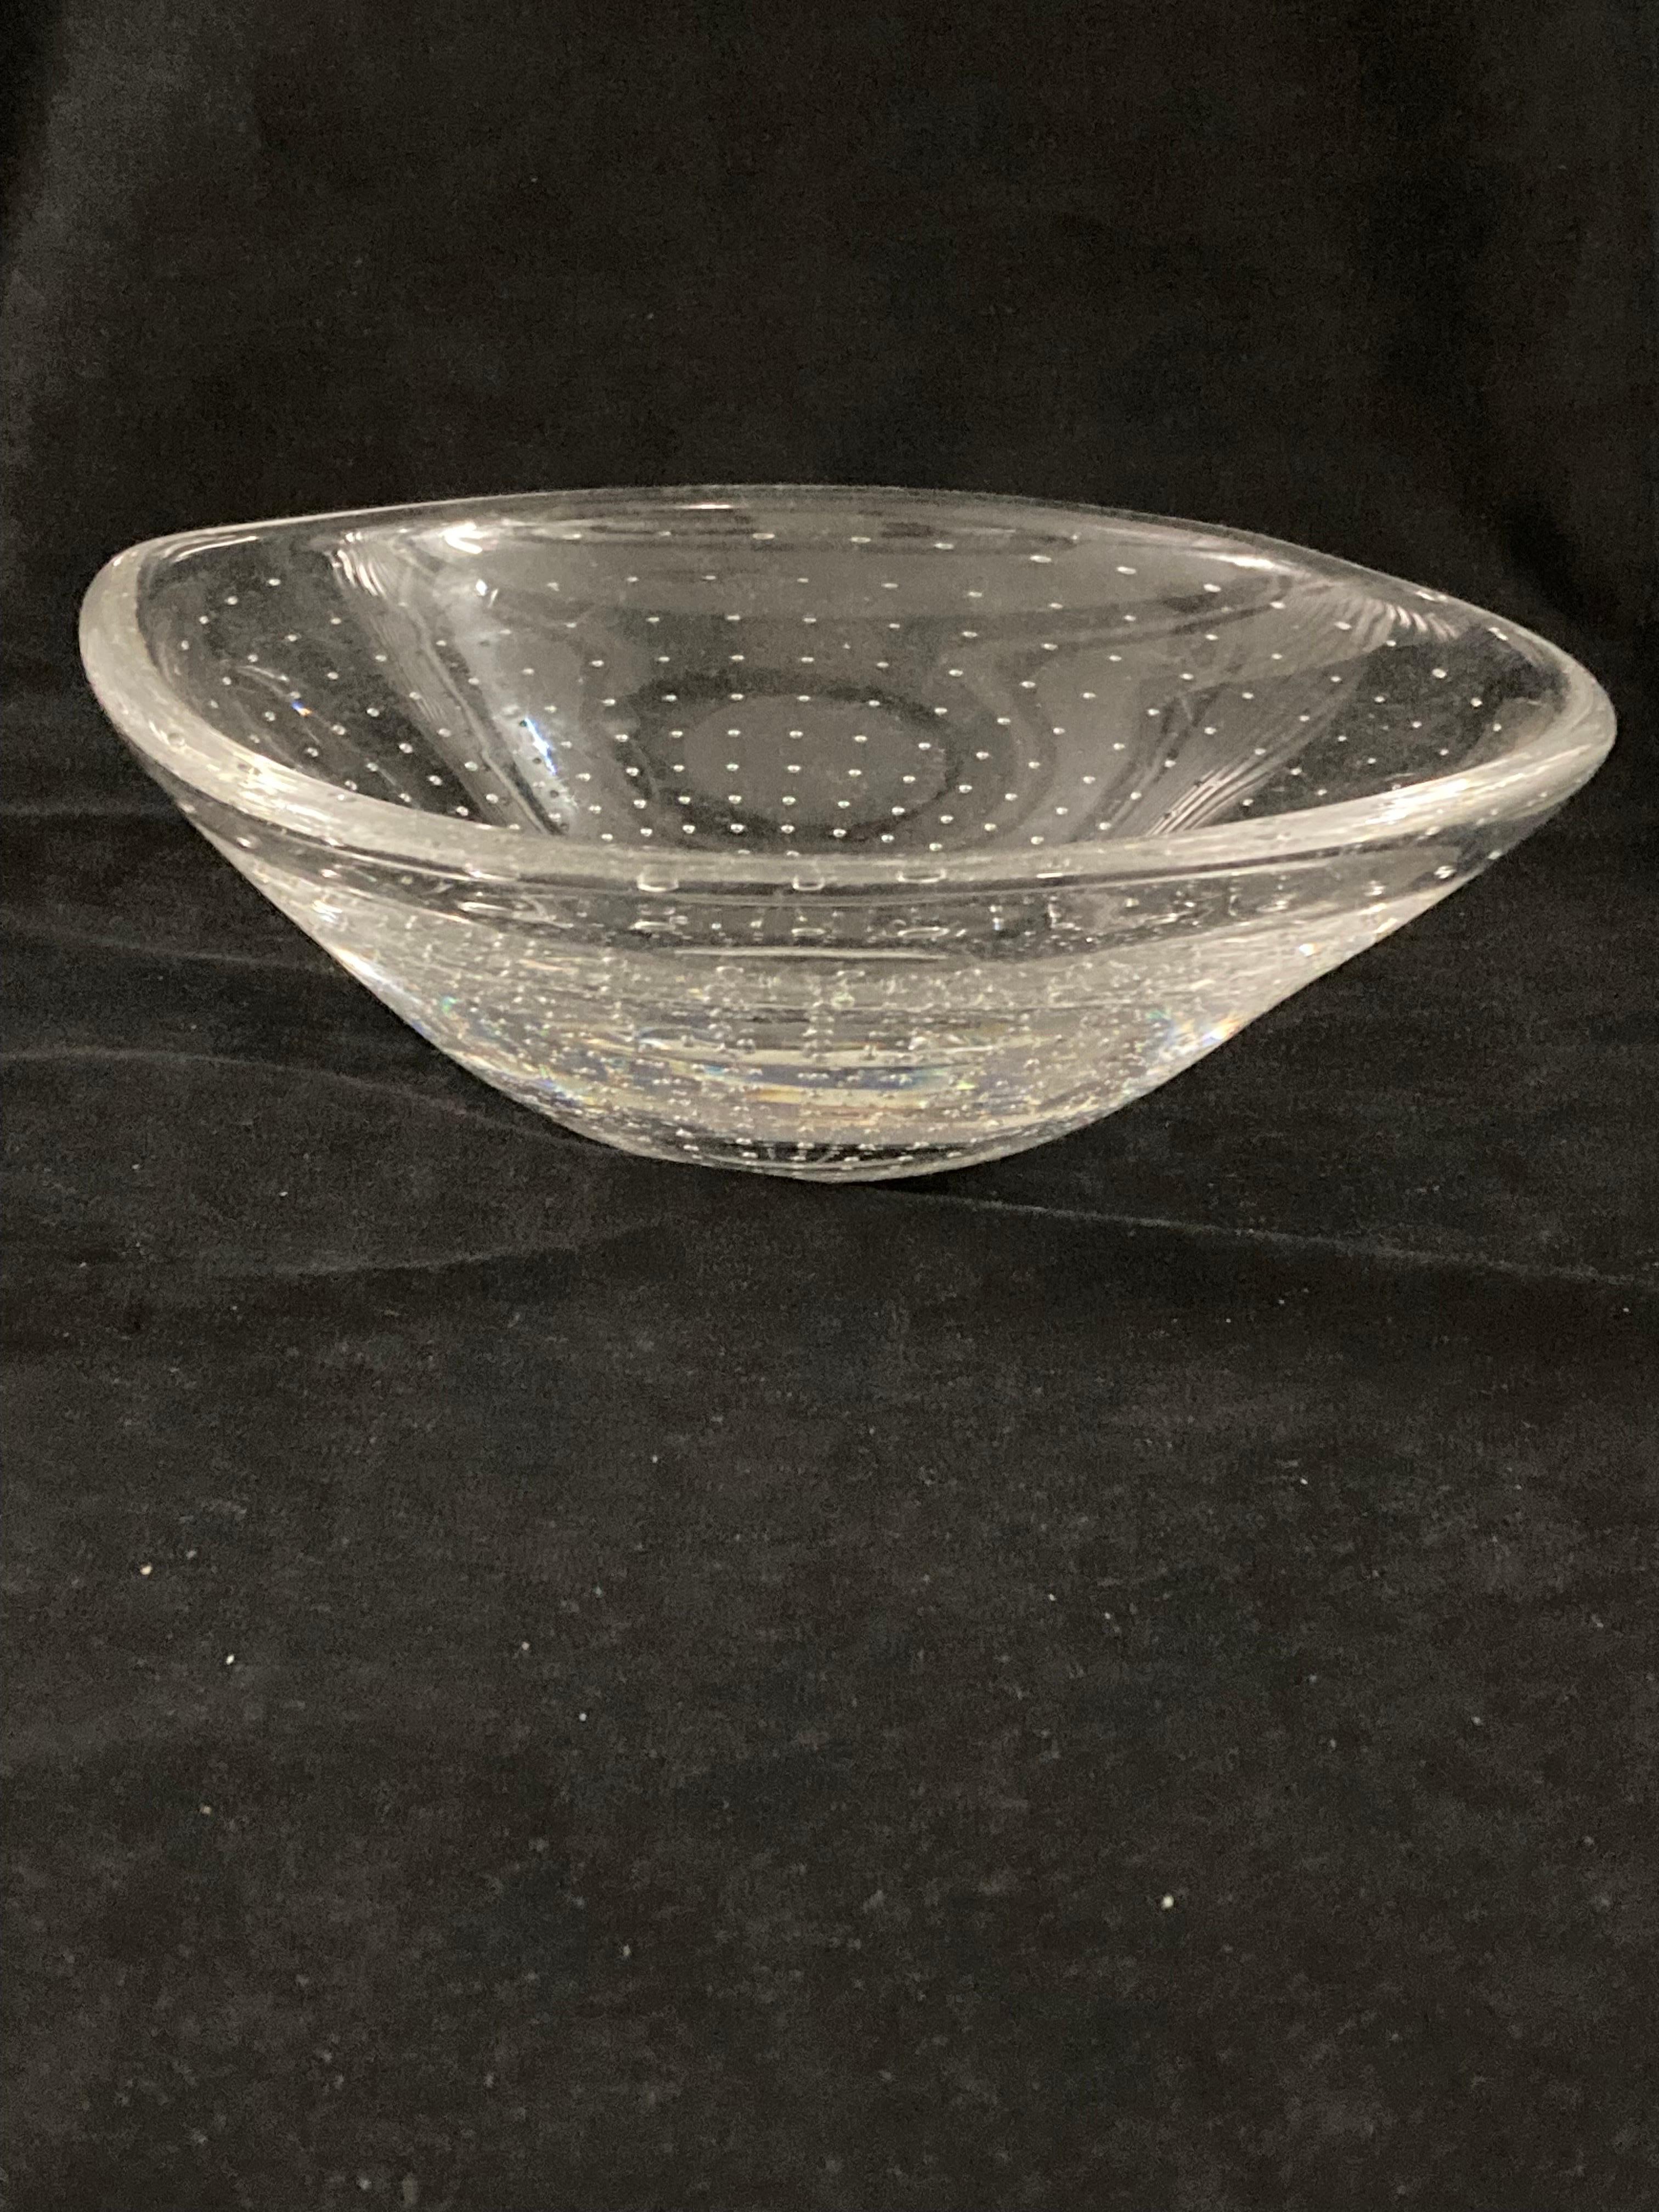 A 1950s Swedish clear glass with air bubbles bowl by Vicke Lindstrand for Kosta.

Made from hand-blown glass with air bubbles. The bowl has an undulating rim, which is not perfectly symmetrical and gives it a more natural handmade appearance.

The